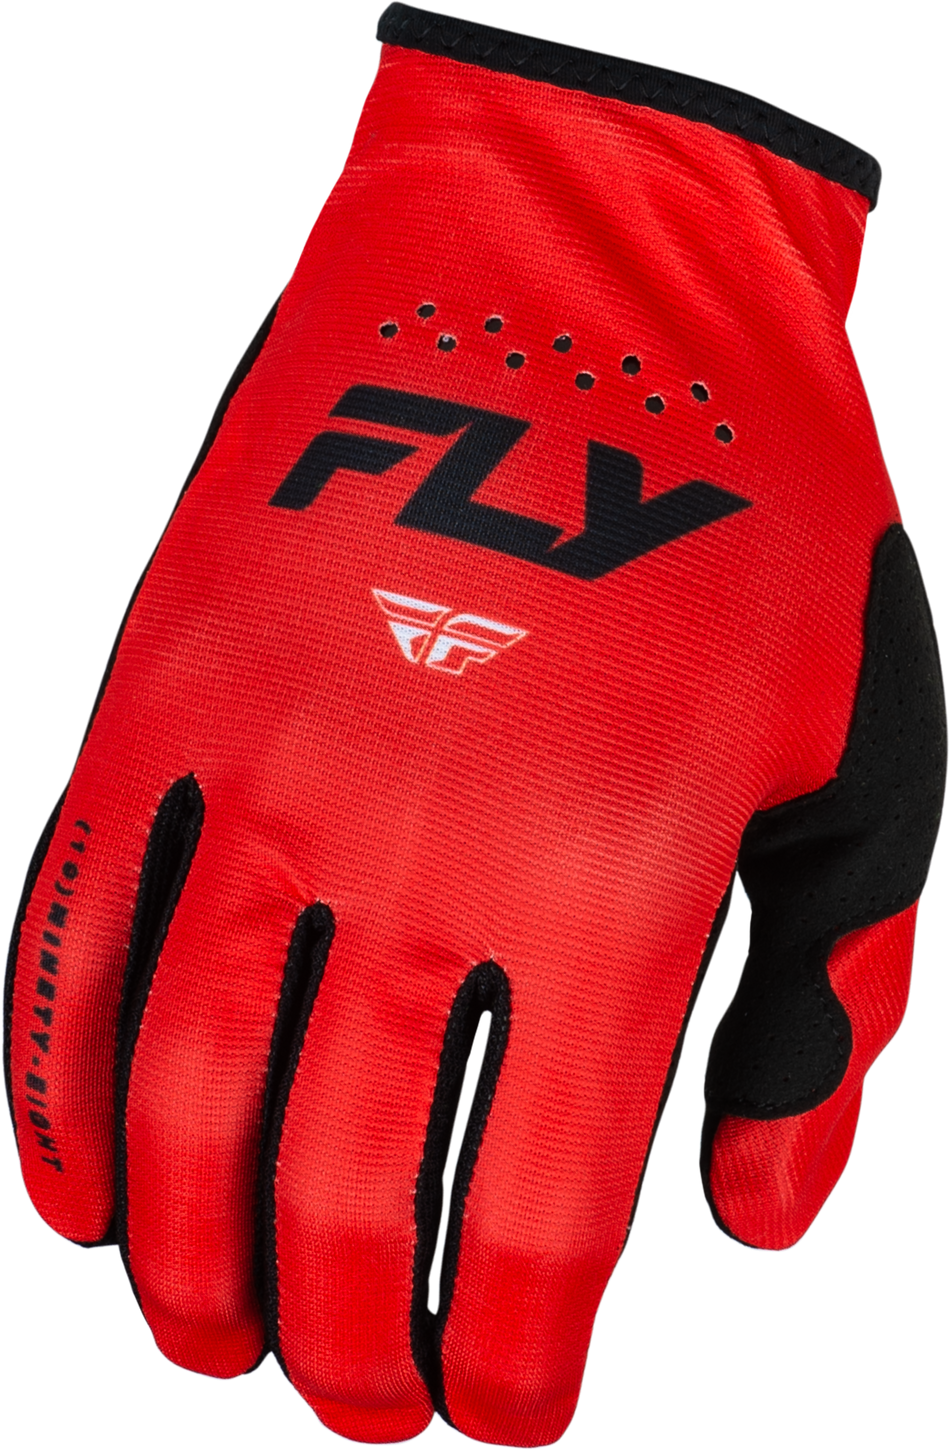 FLY RACING Lite Gloves Red/Black Md 377-712M